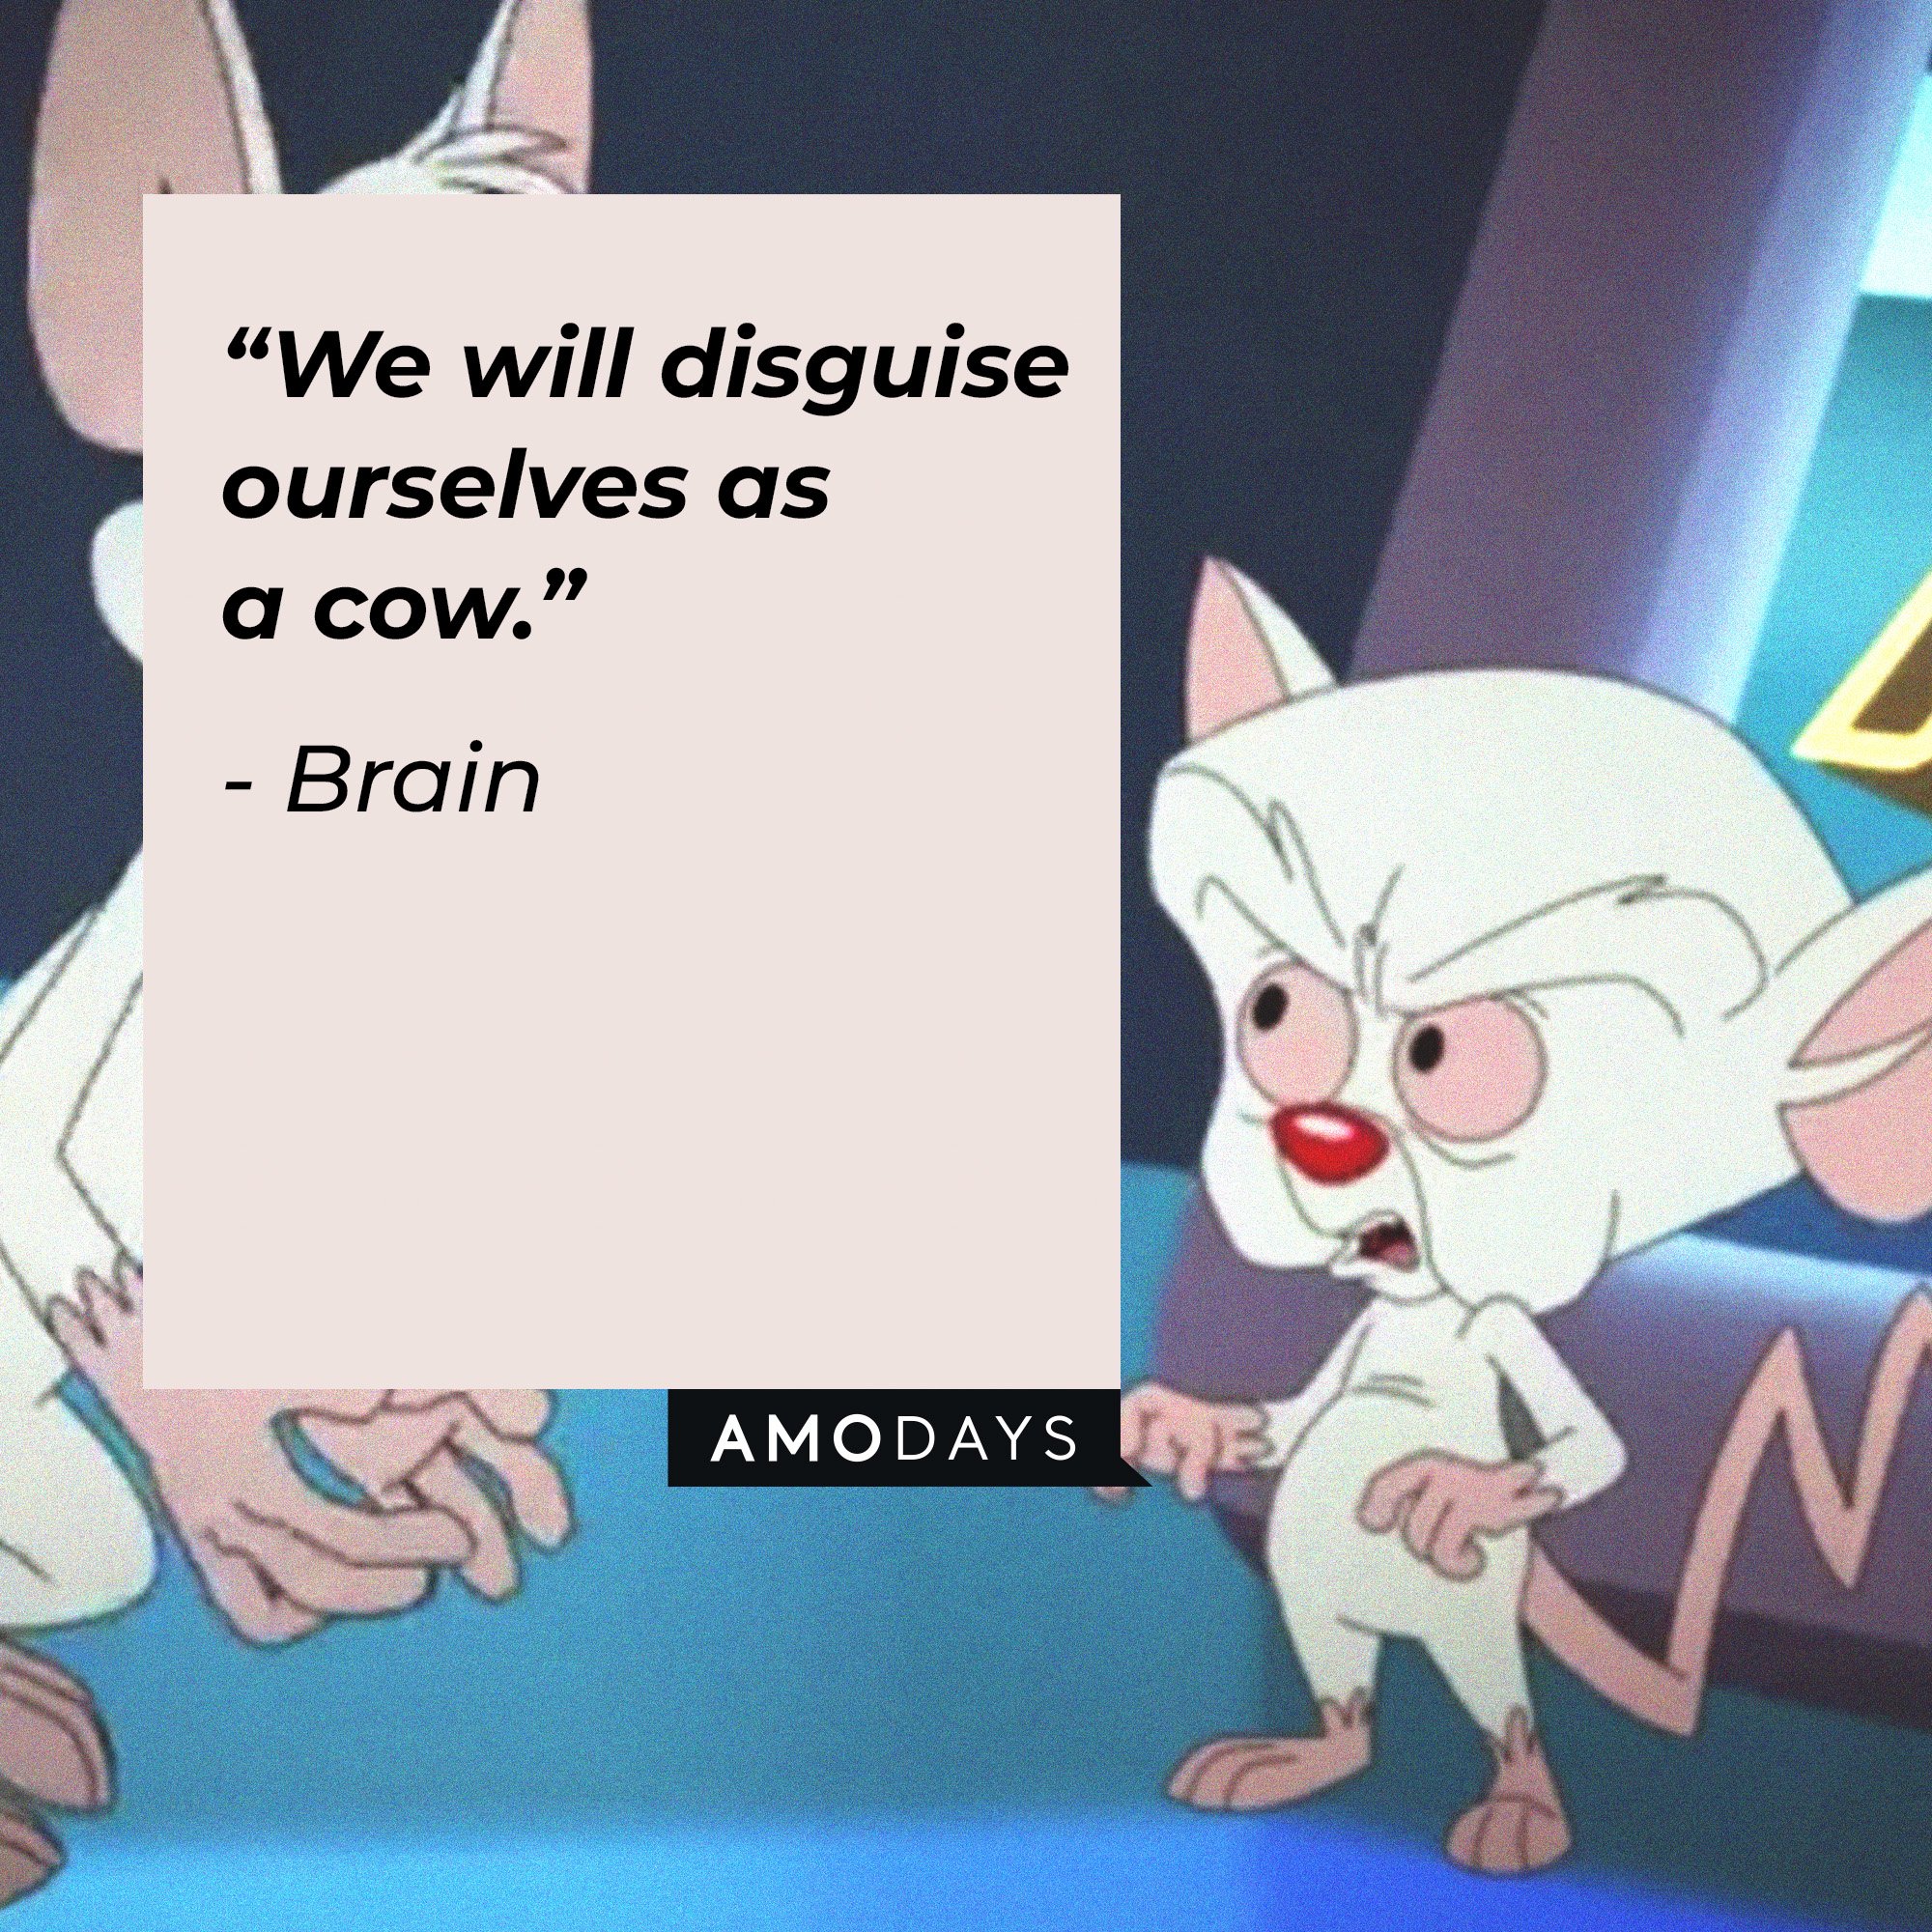  Brain's quote: “We will disguise ourselves as a cow.” | Image: AmoDays